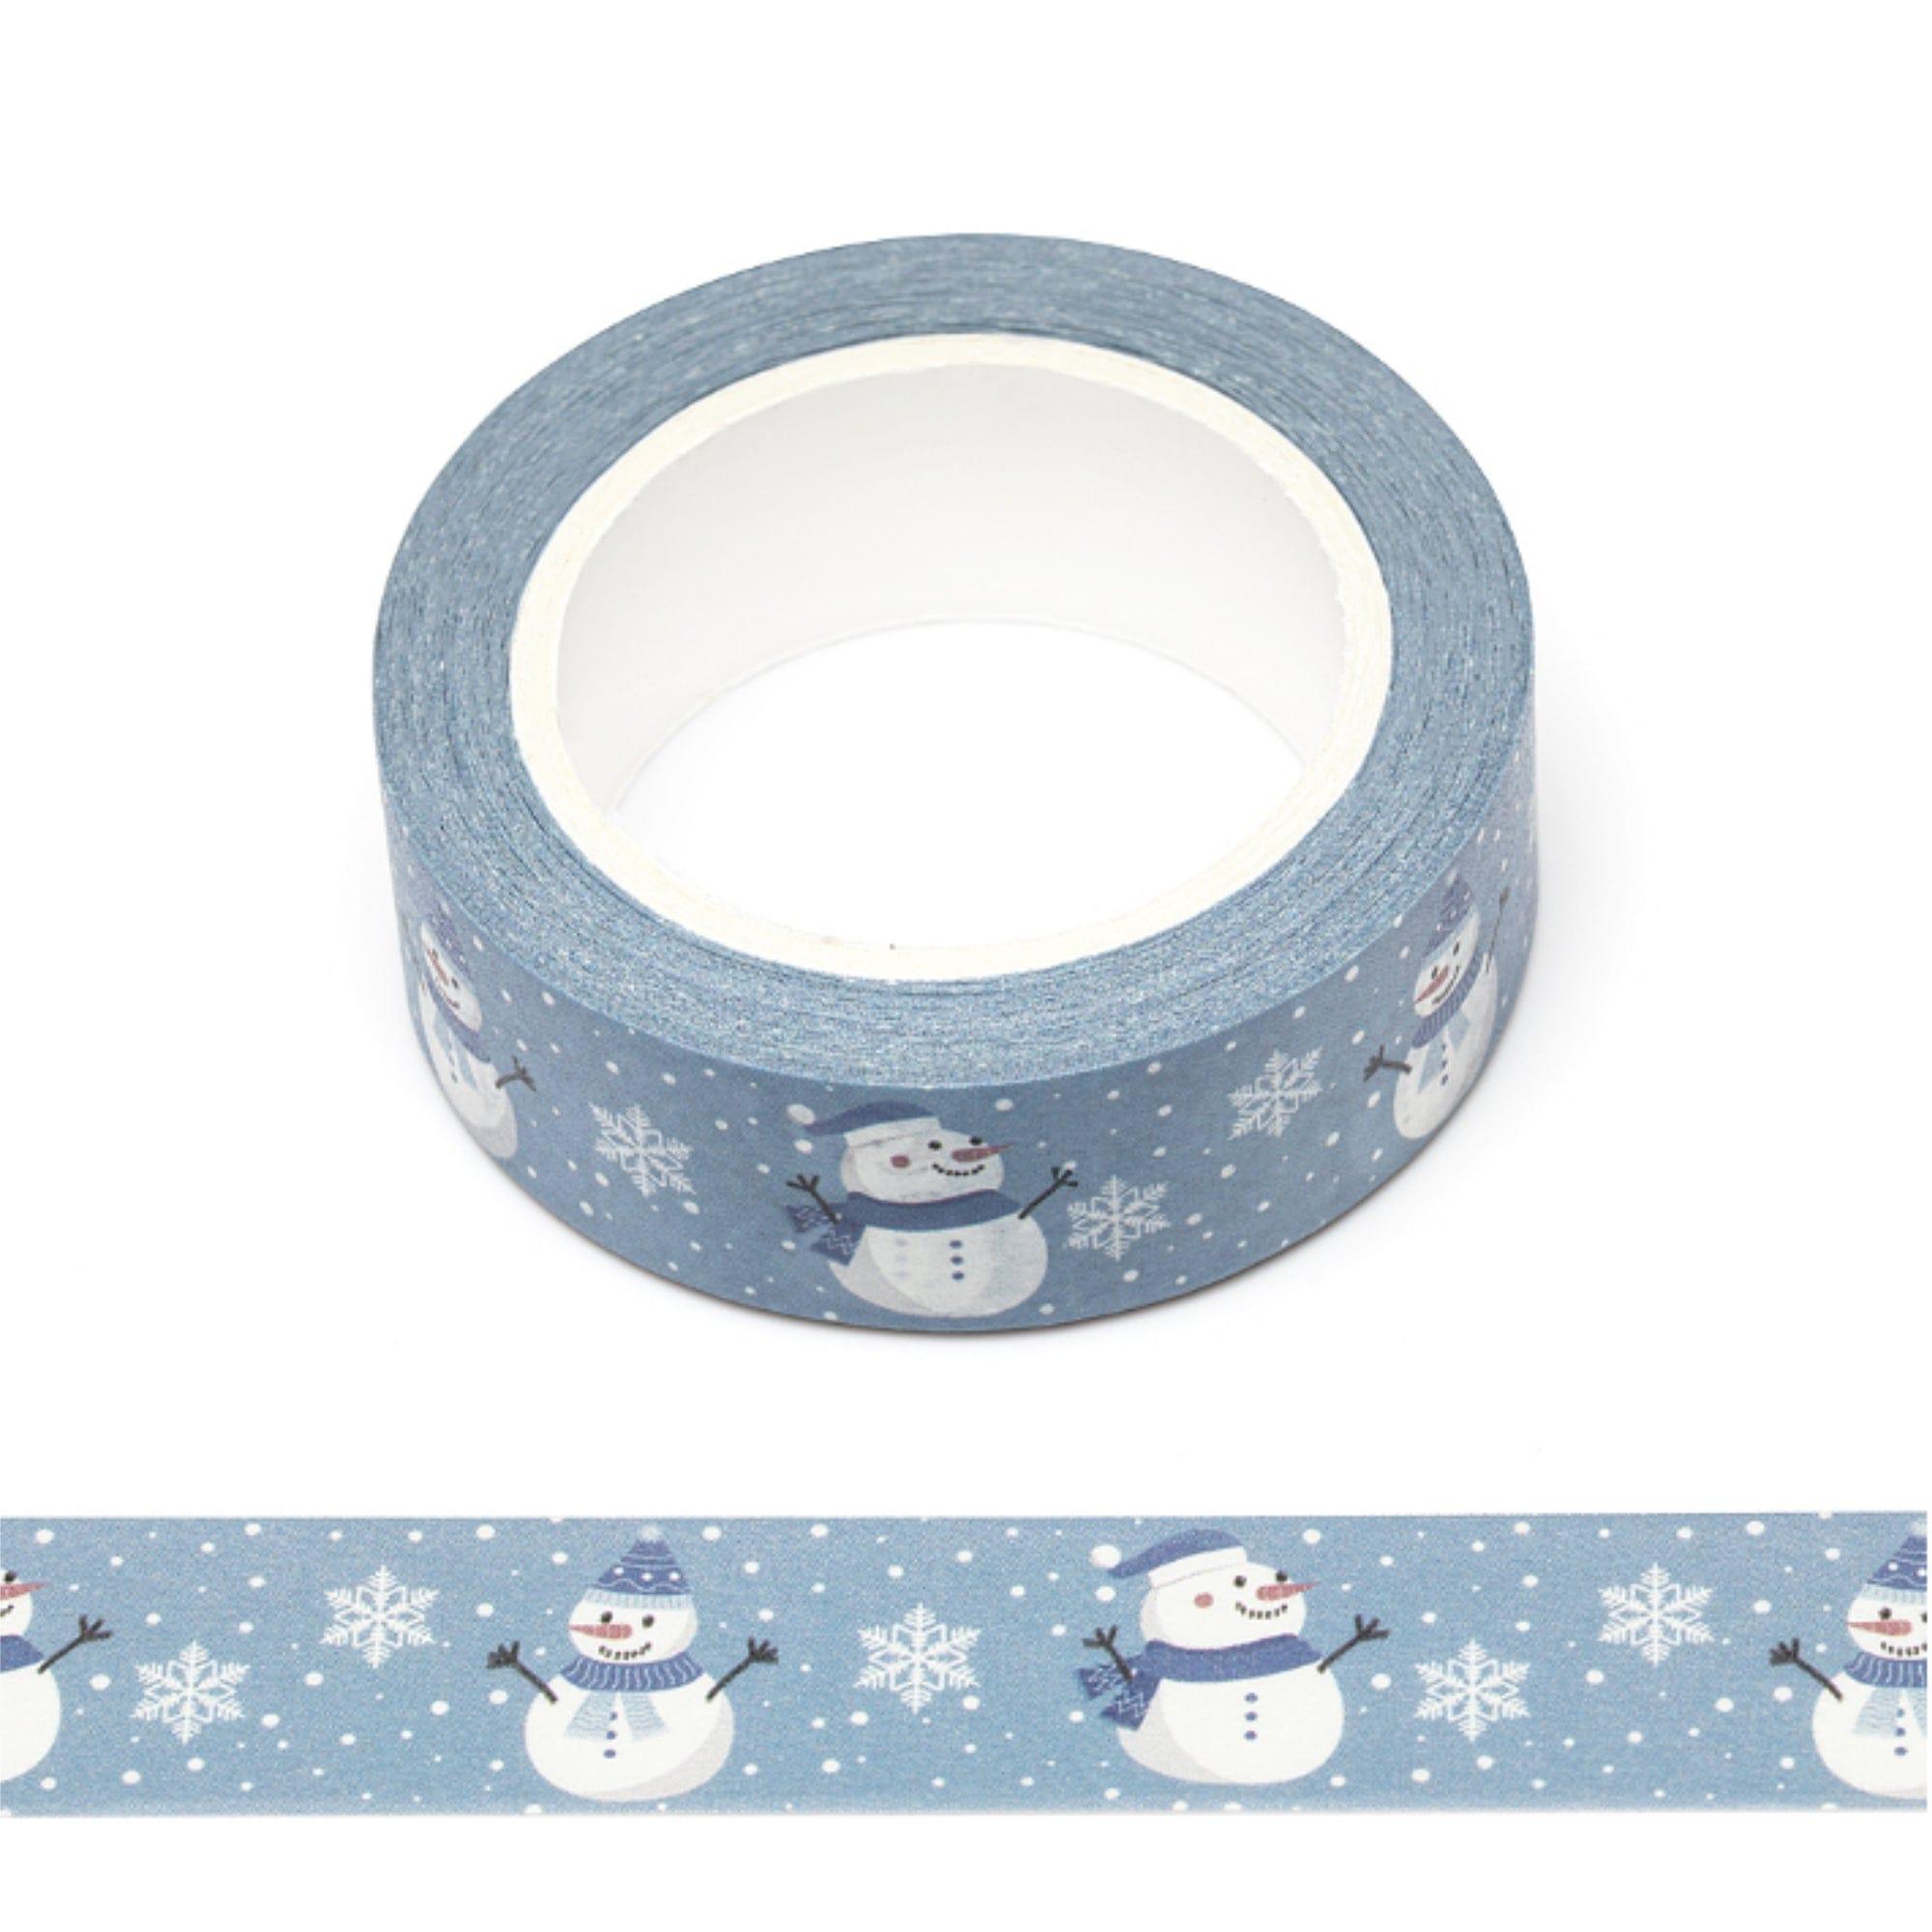 TW Collection Snowman & Snowflakes Washi Tape by SSC Designs - 15mm x 30 Feet - Scrapbook Supply Companies